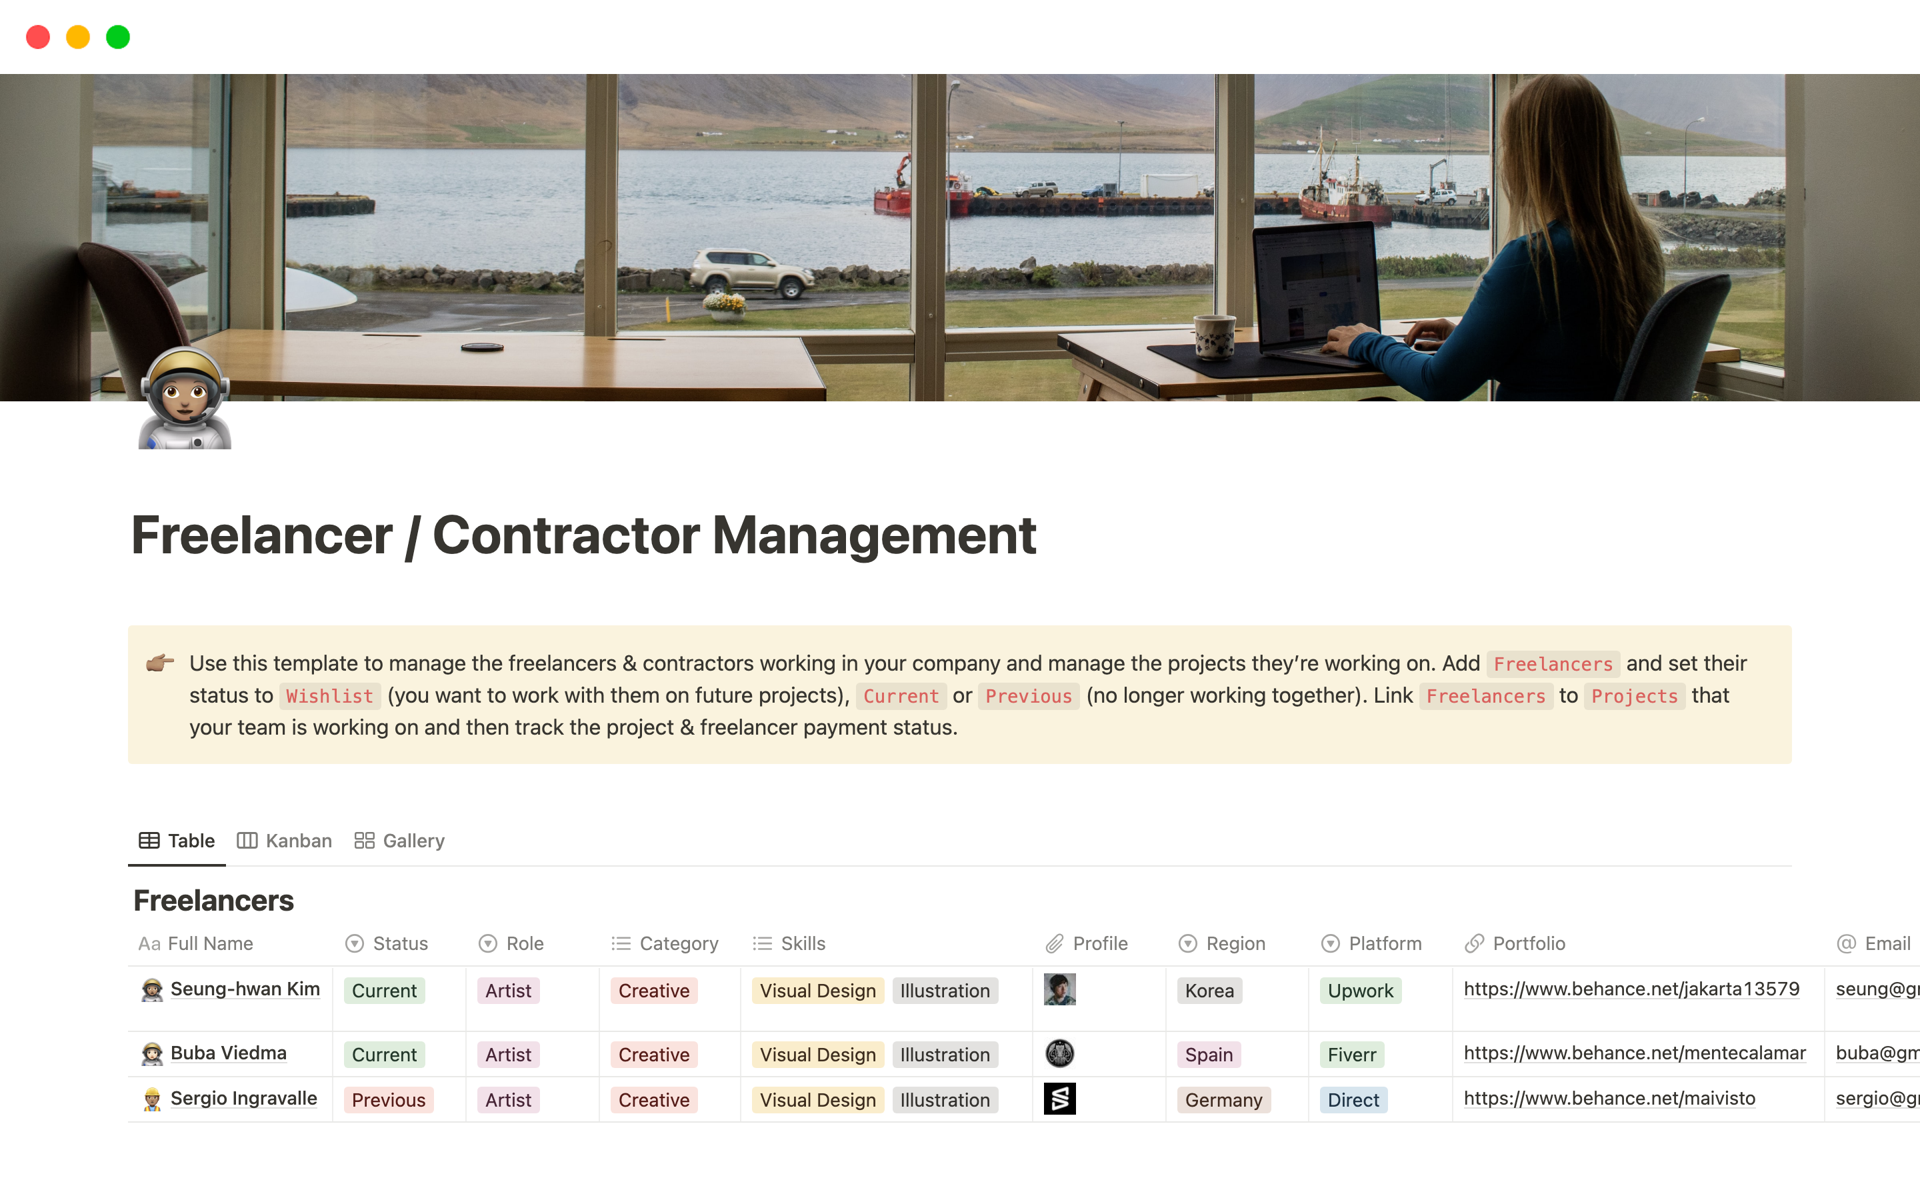 This template is perfect for organising your outsourced freelancers and external contractors.